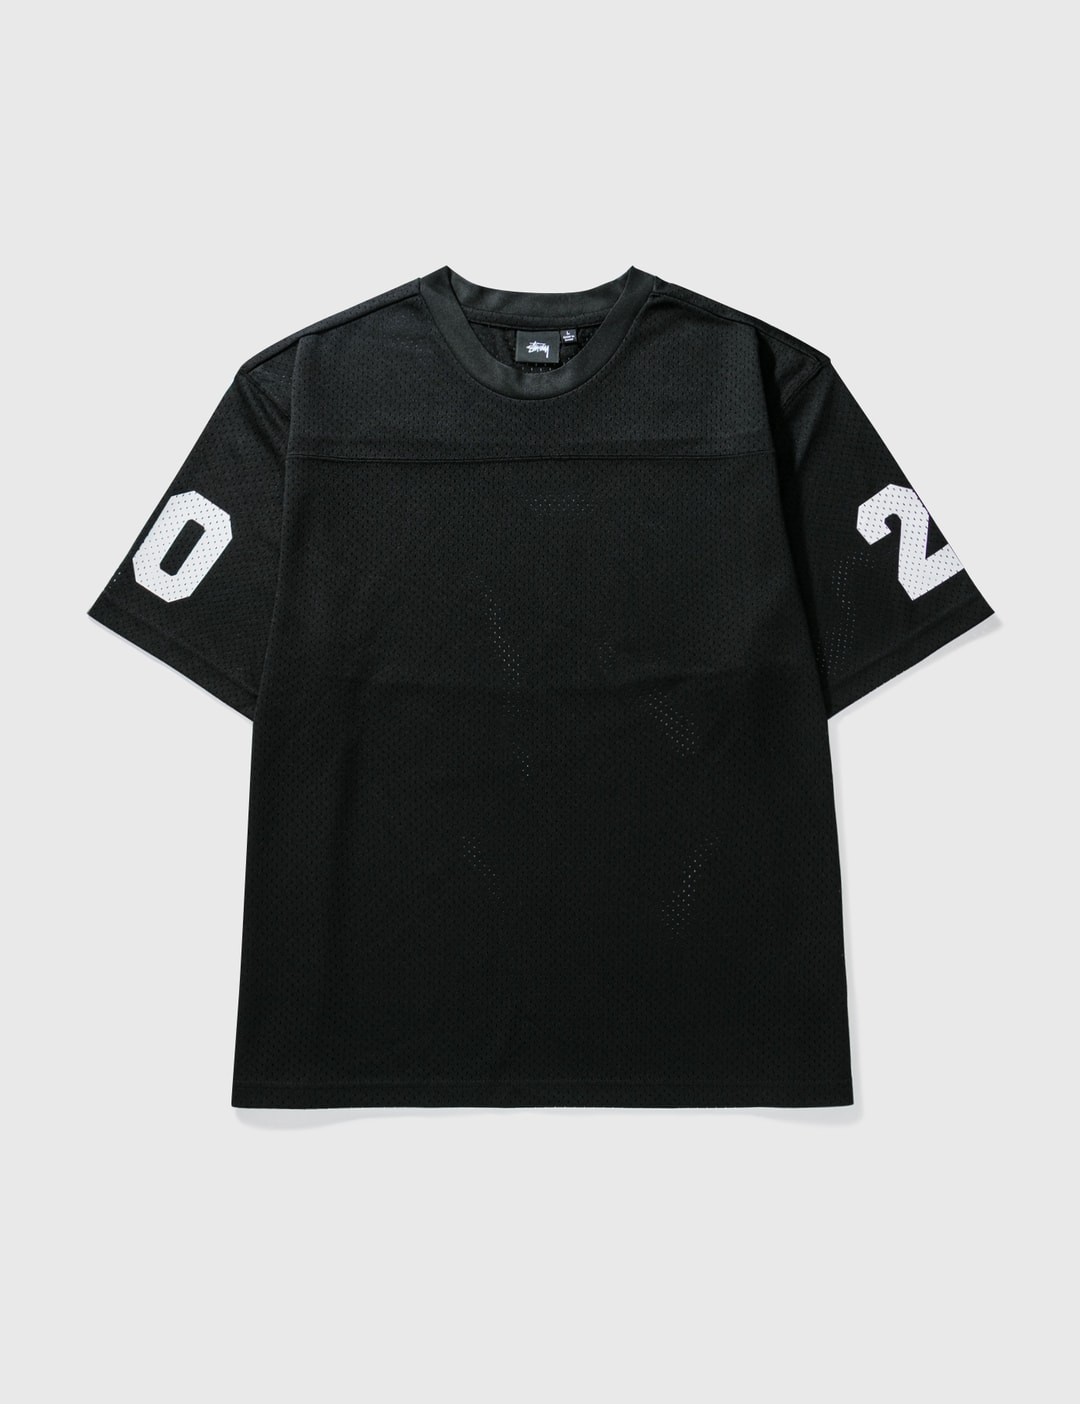 Stüssy - Mesh Football Jersey | HBX - Globally Curated Fashion and ...